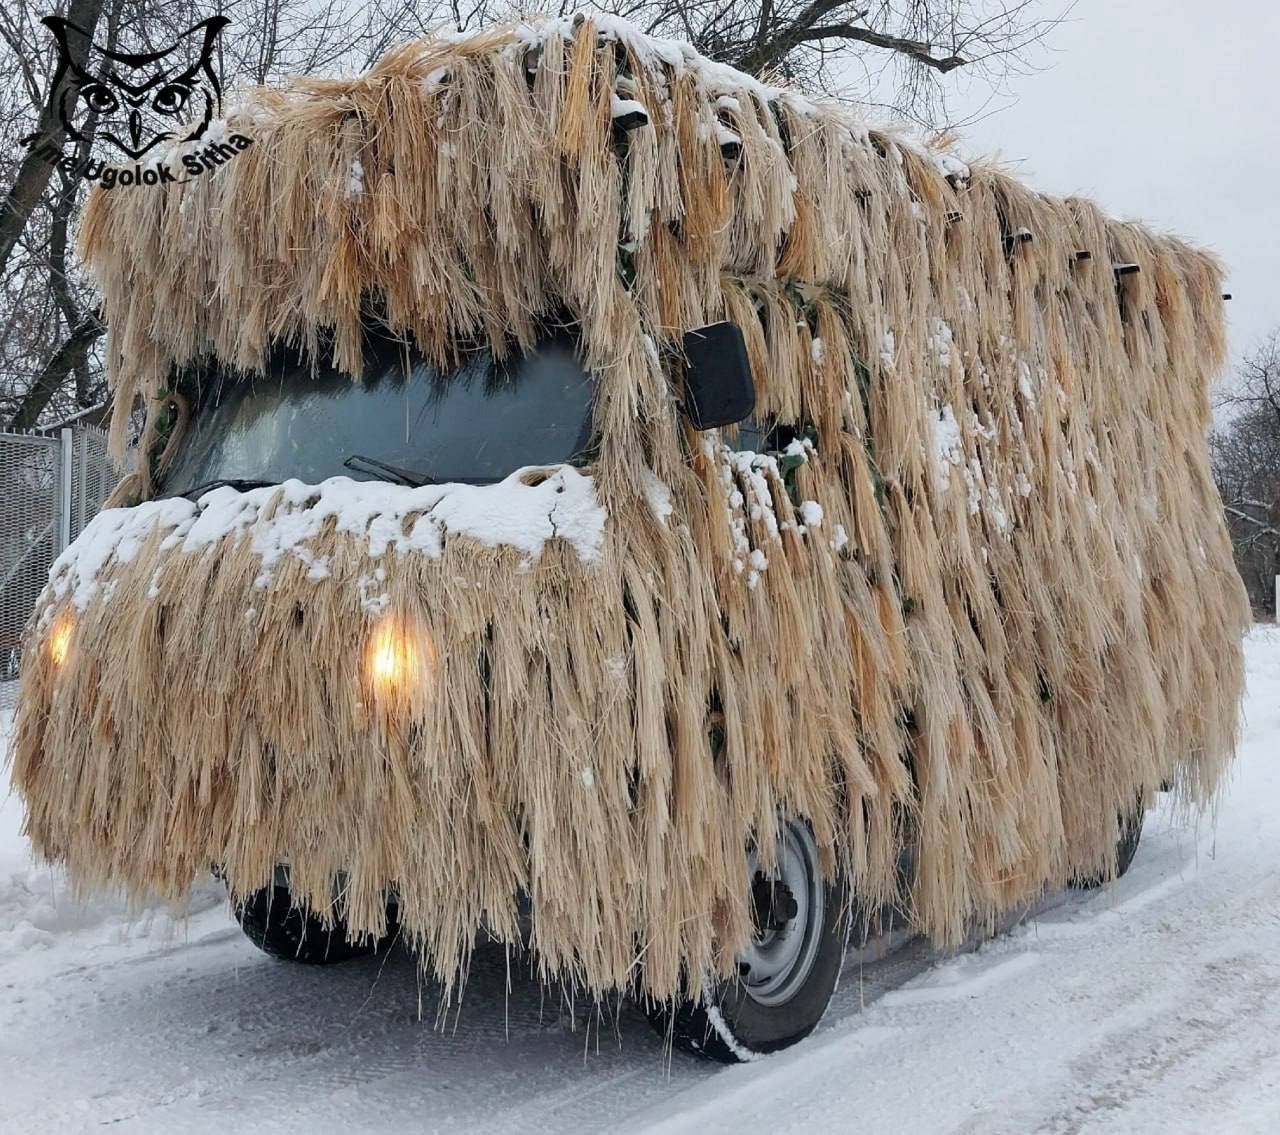 A Russian car in astonishing combat camouflage